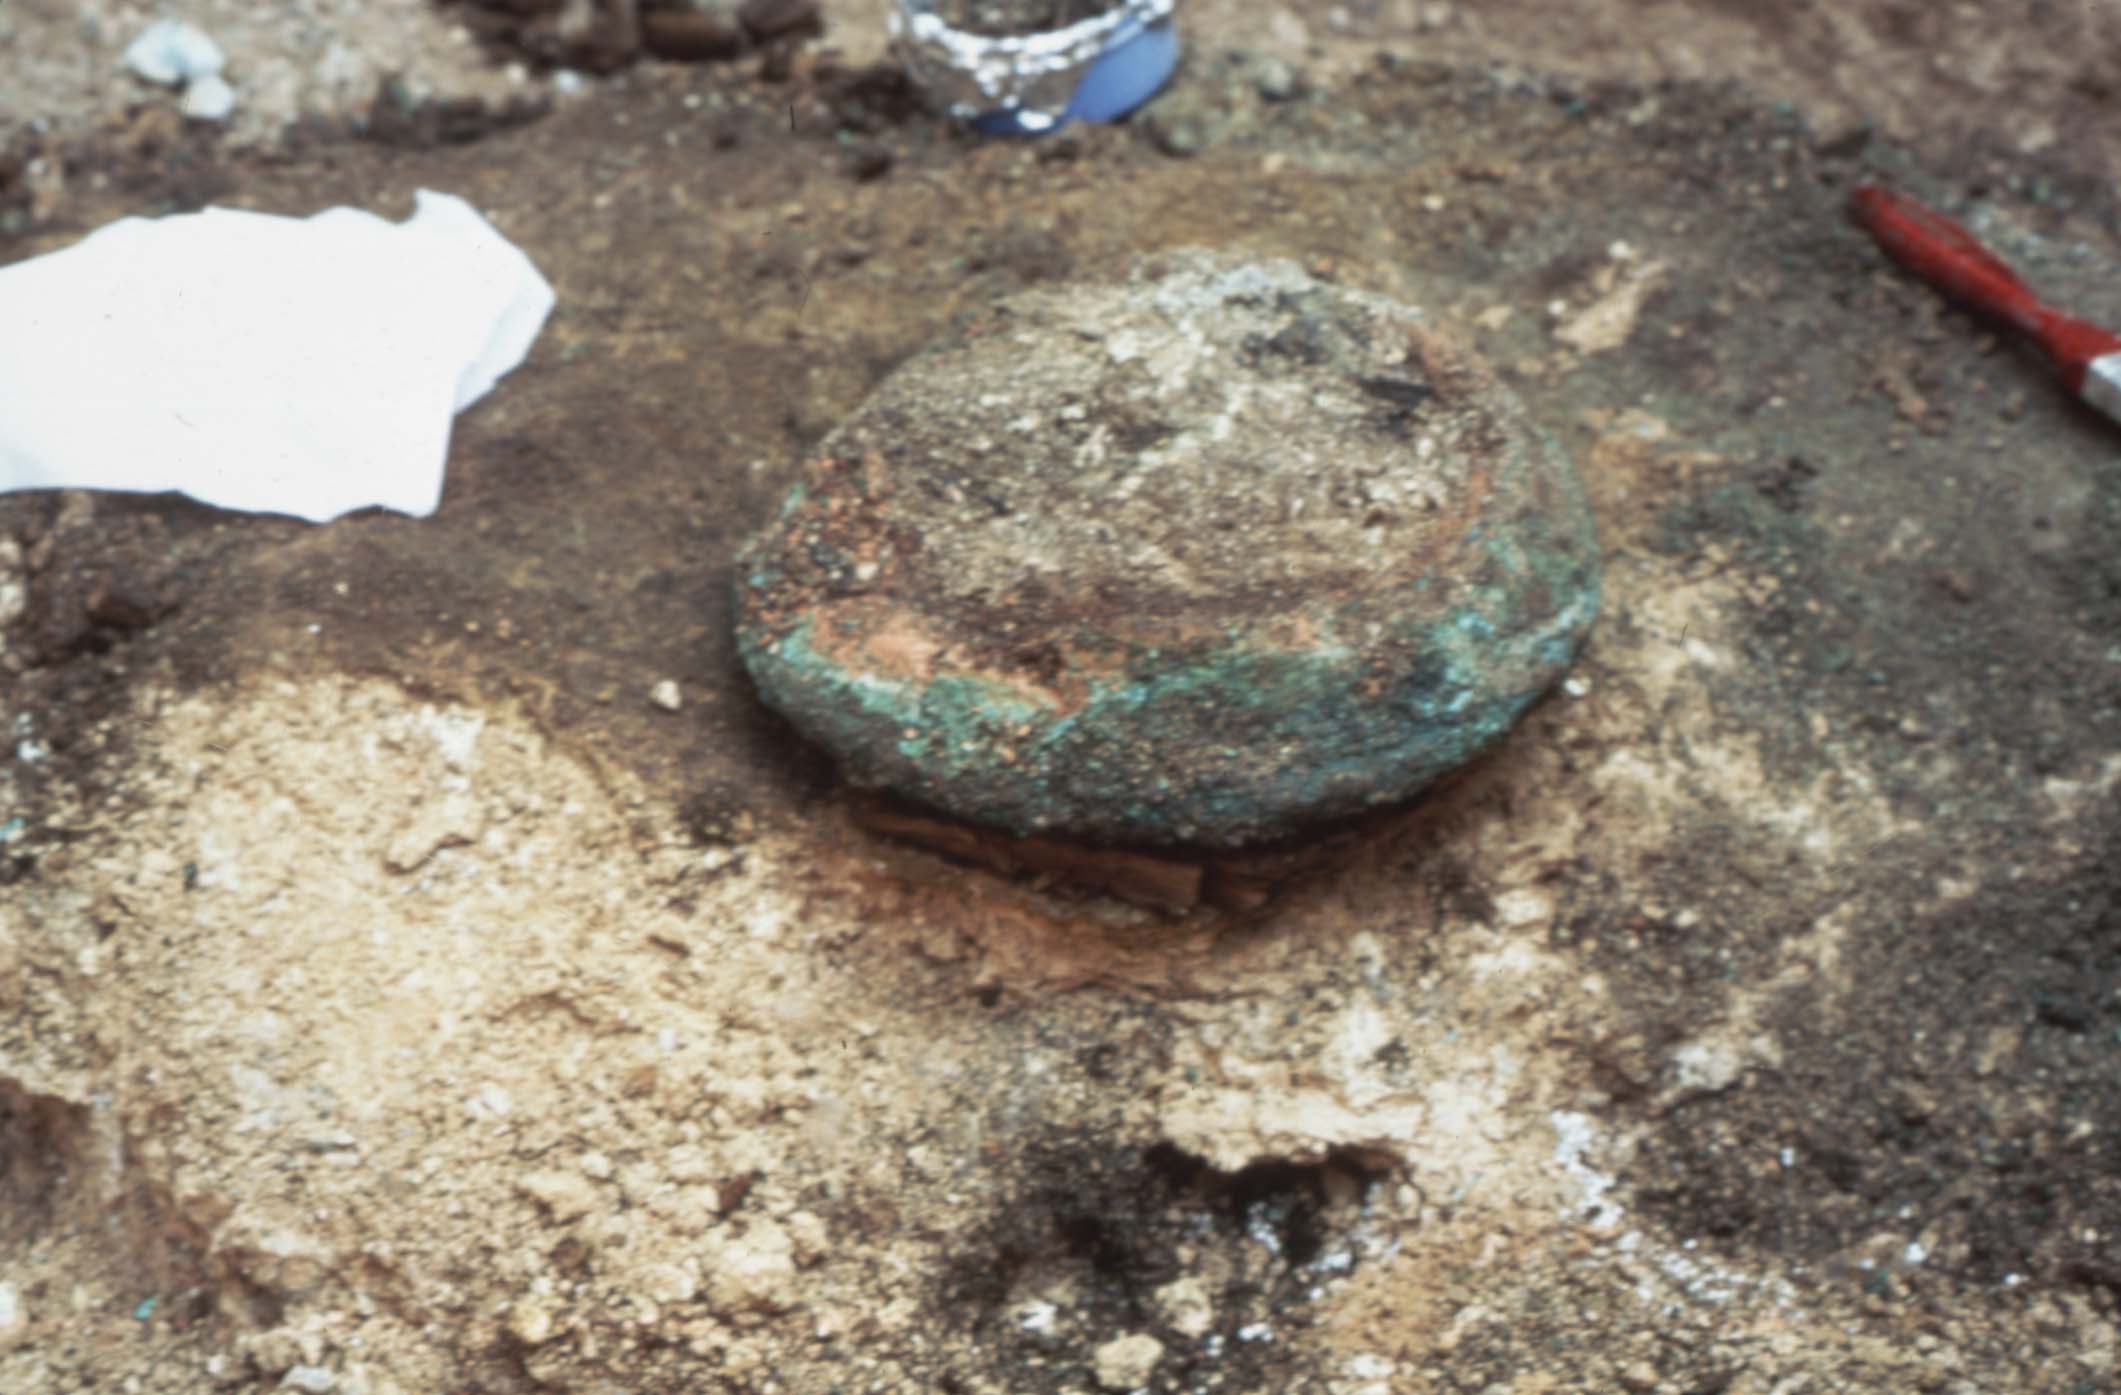 Lefkandi Bronze Amphora During Excavation. The amphora is upside down and surrounded by soil, looks to be mid-excavation. 